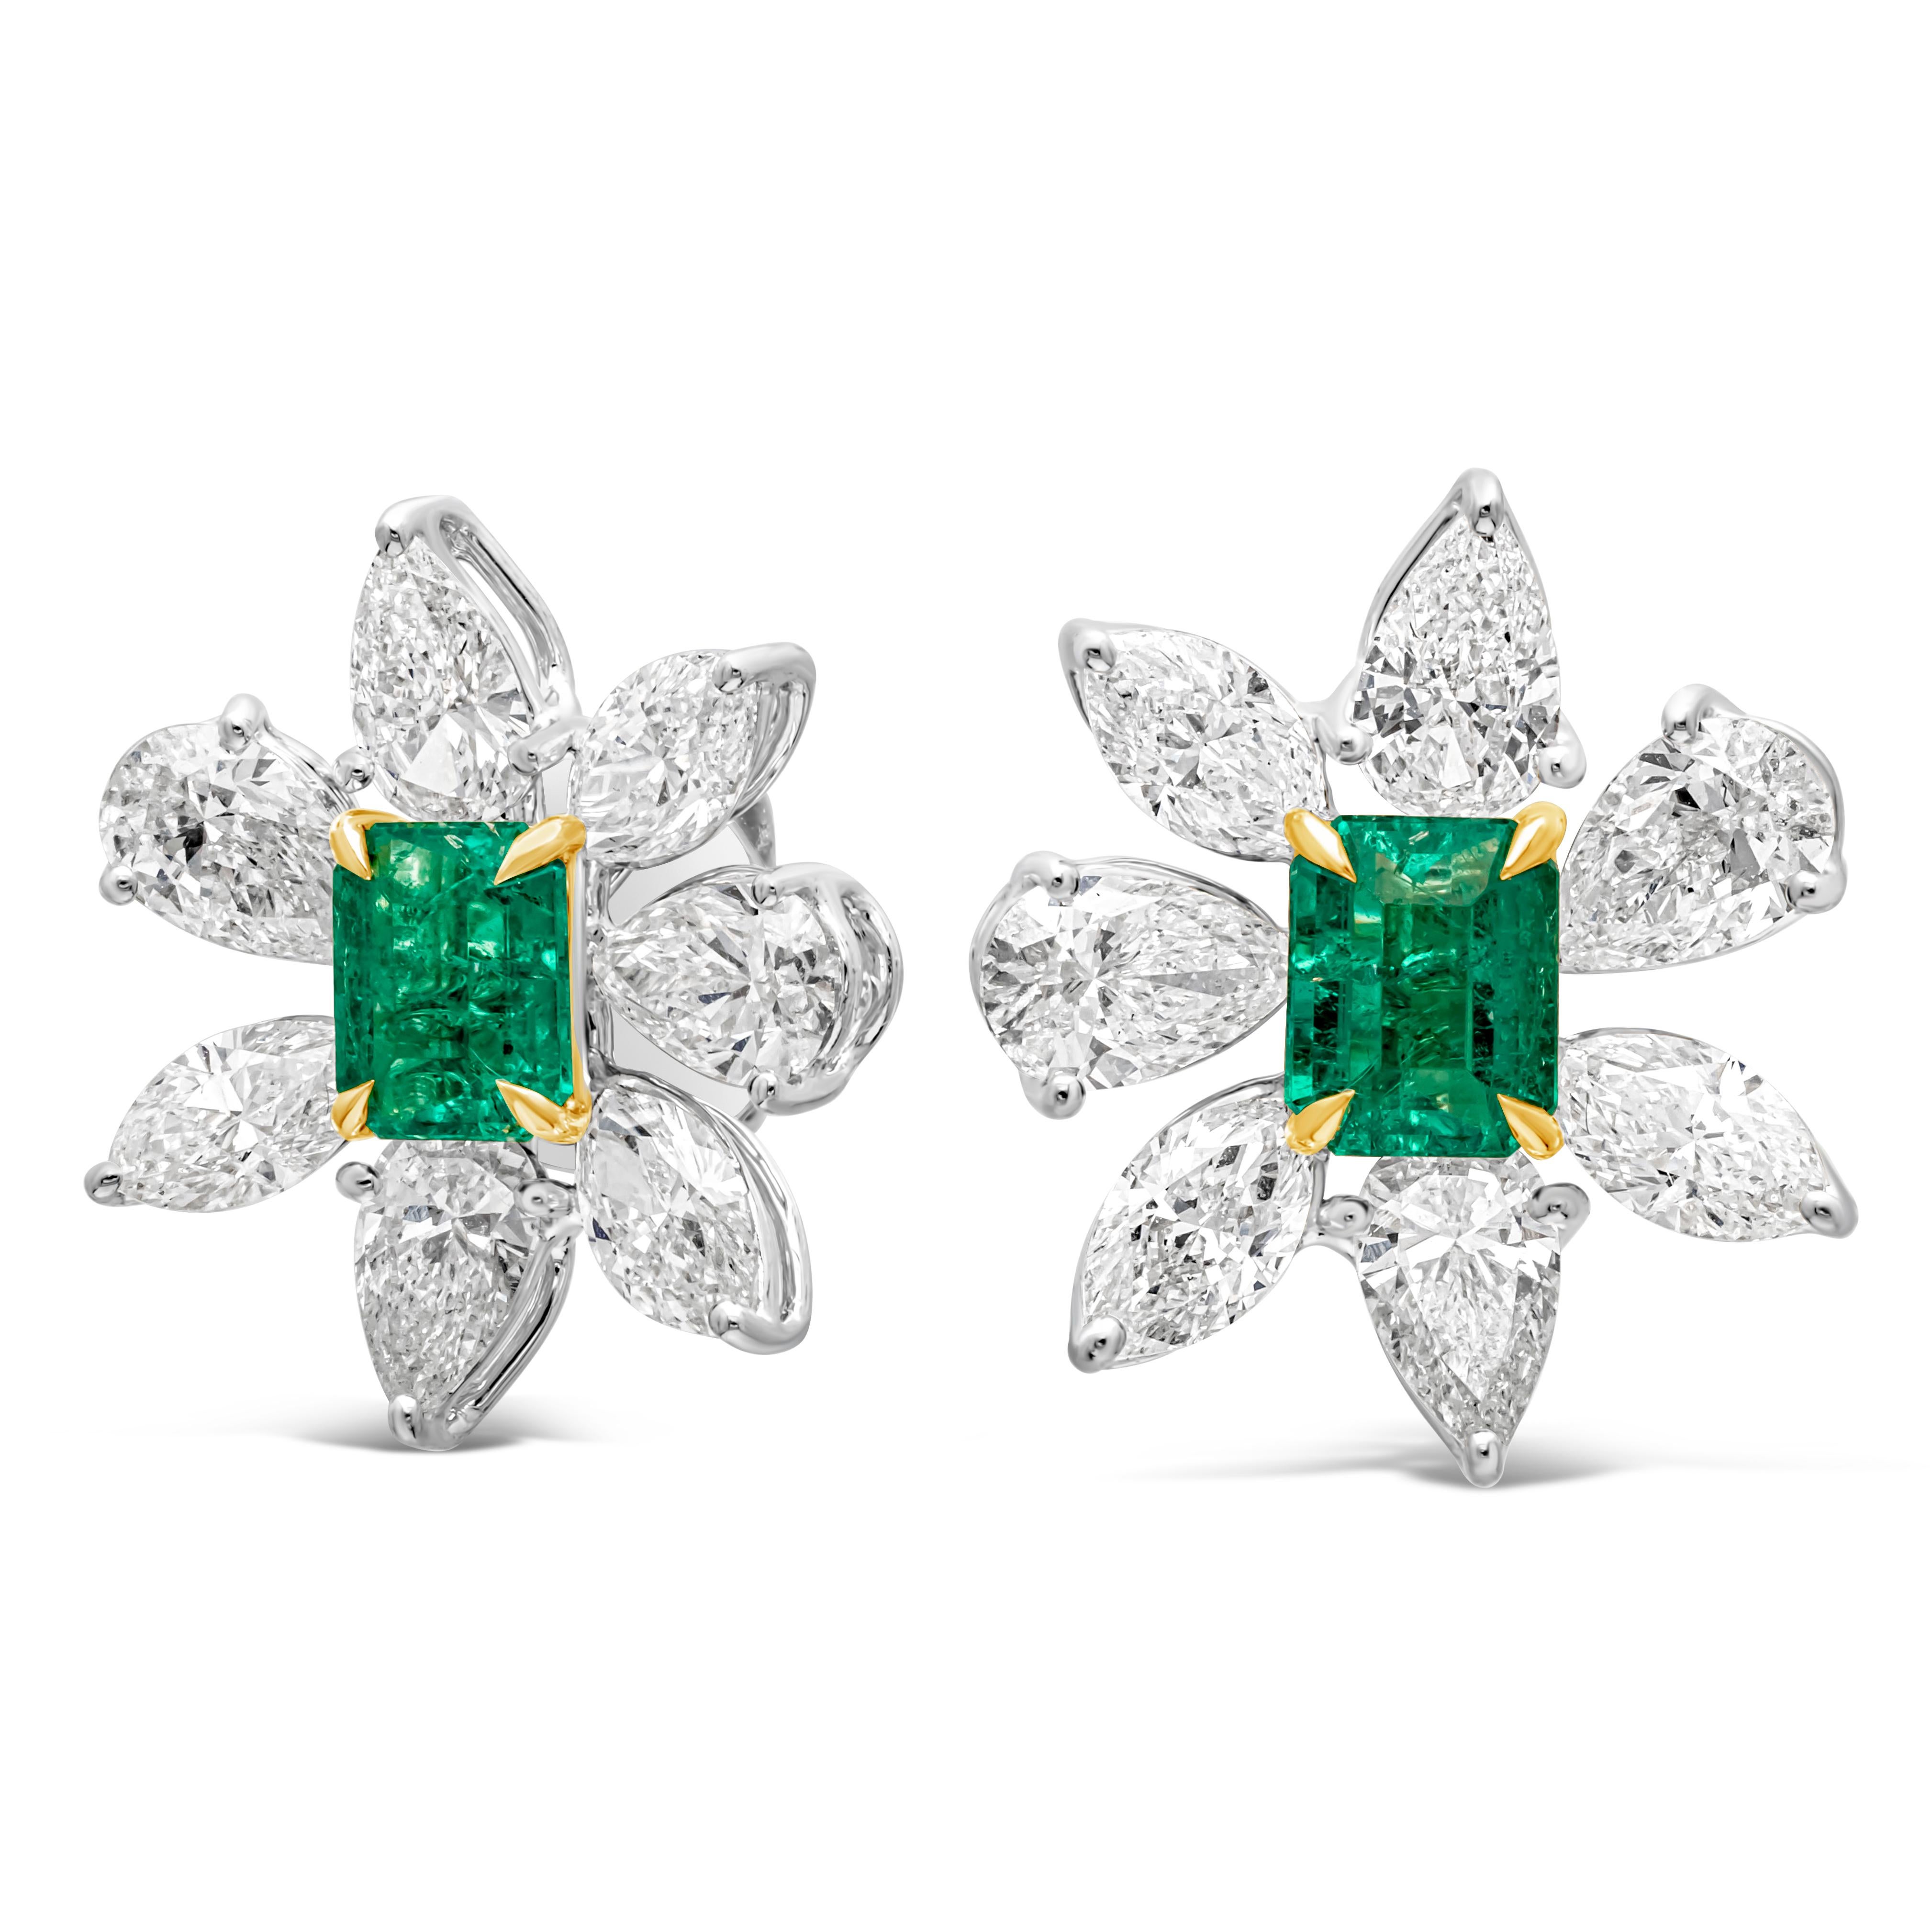 A very beautiful and fashionable pair of stud earrings, featuring radiant cut color-rich green emeralds weighing 1.17 carats total, set on a classic four prong basket setting made of 18K yellow gold. Surrounded by brilliant pear and marquise shape